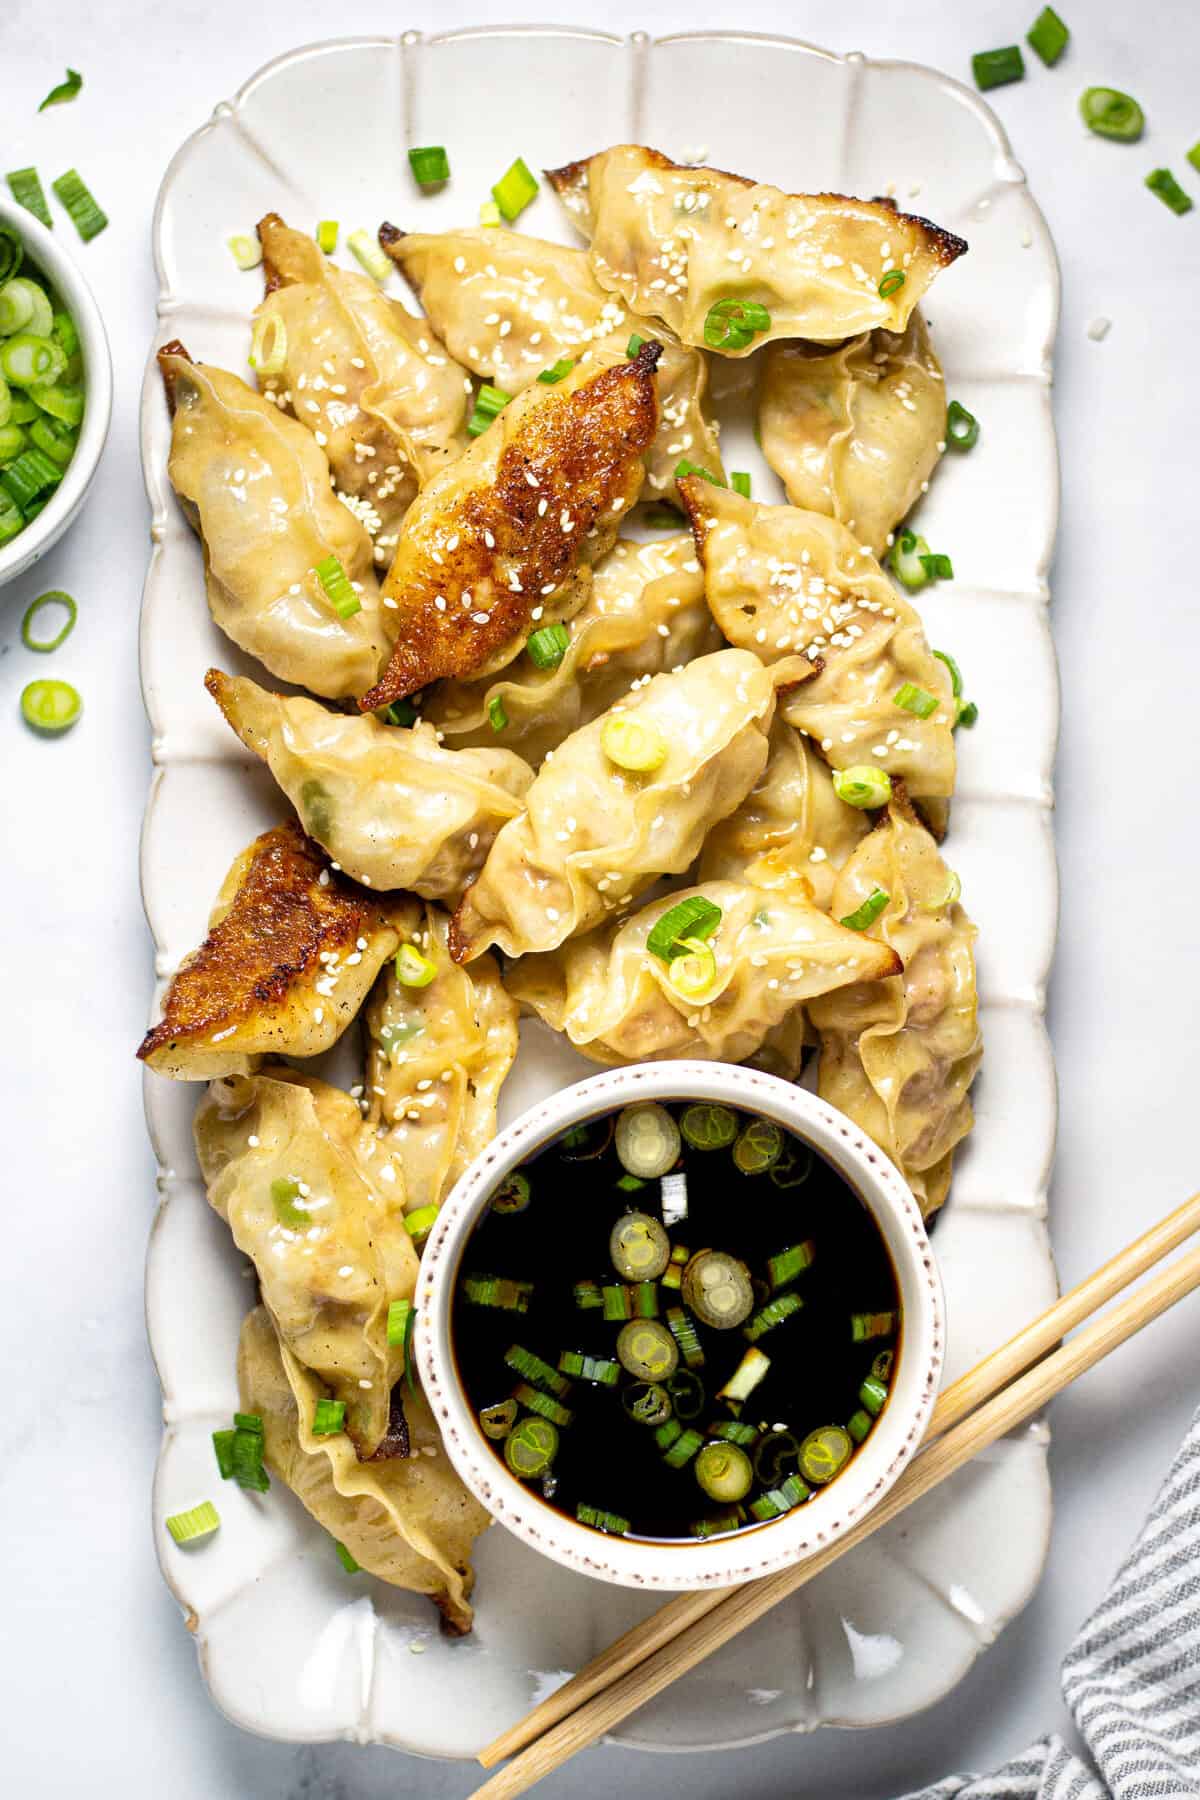 Large white platter filled with homemade pork dumplings garnished with sliced green onions